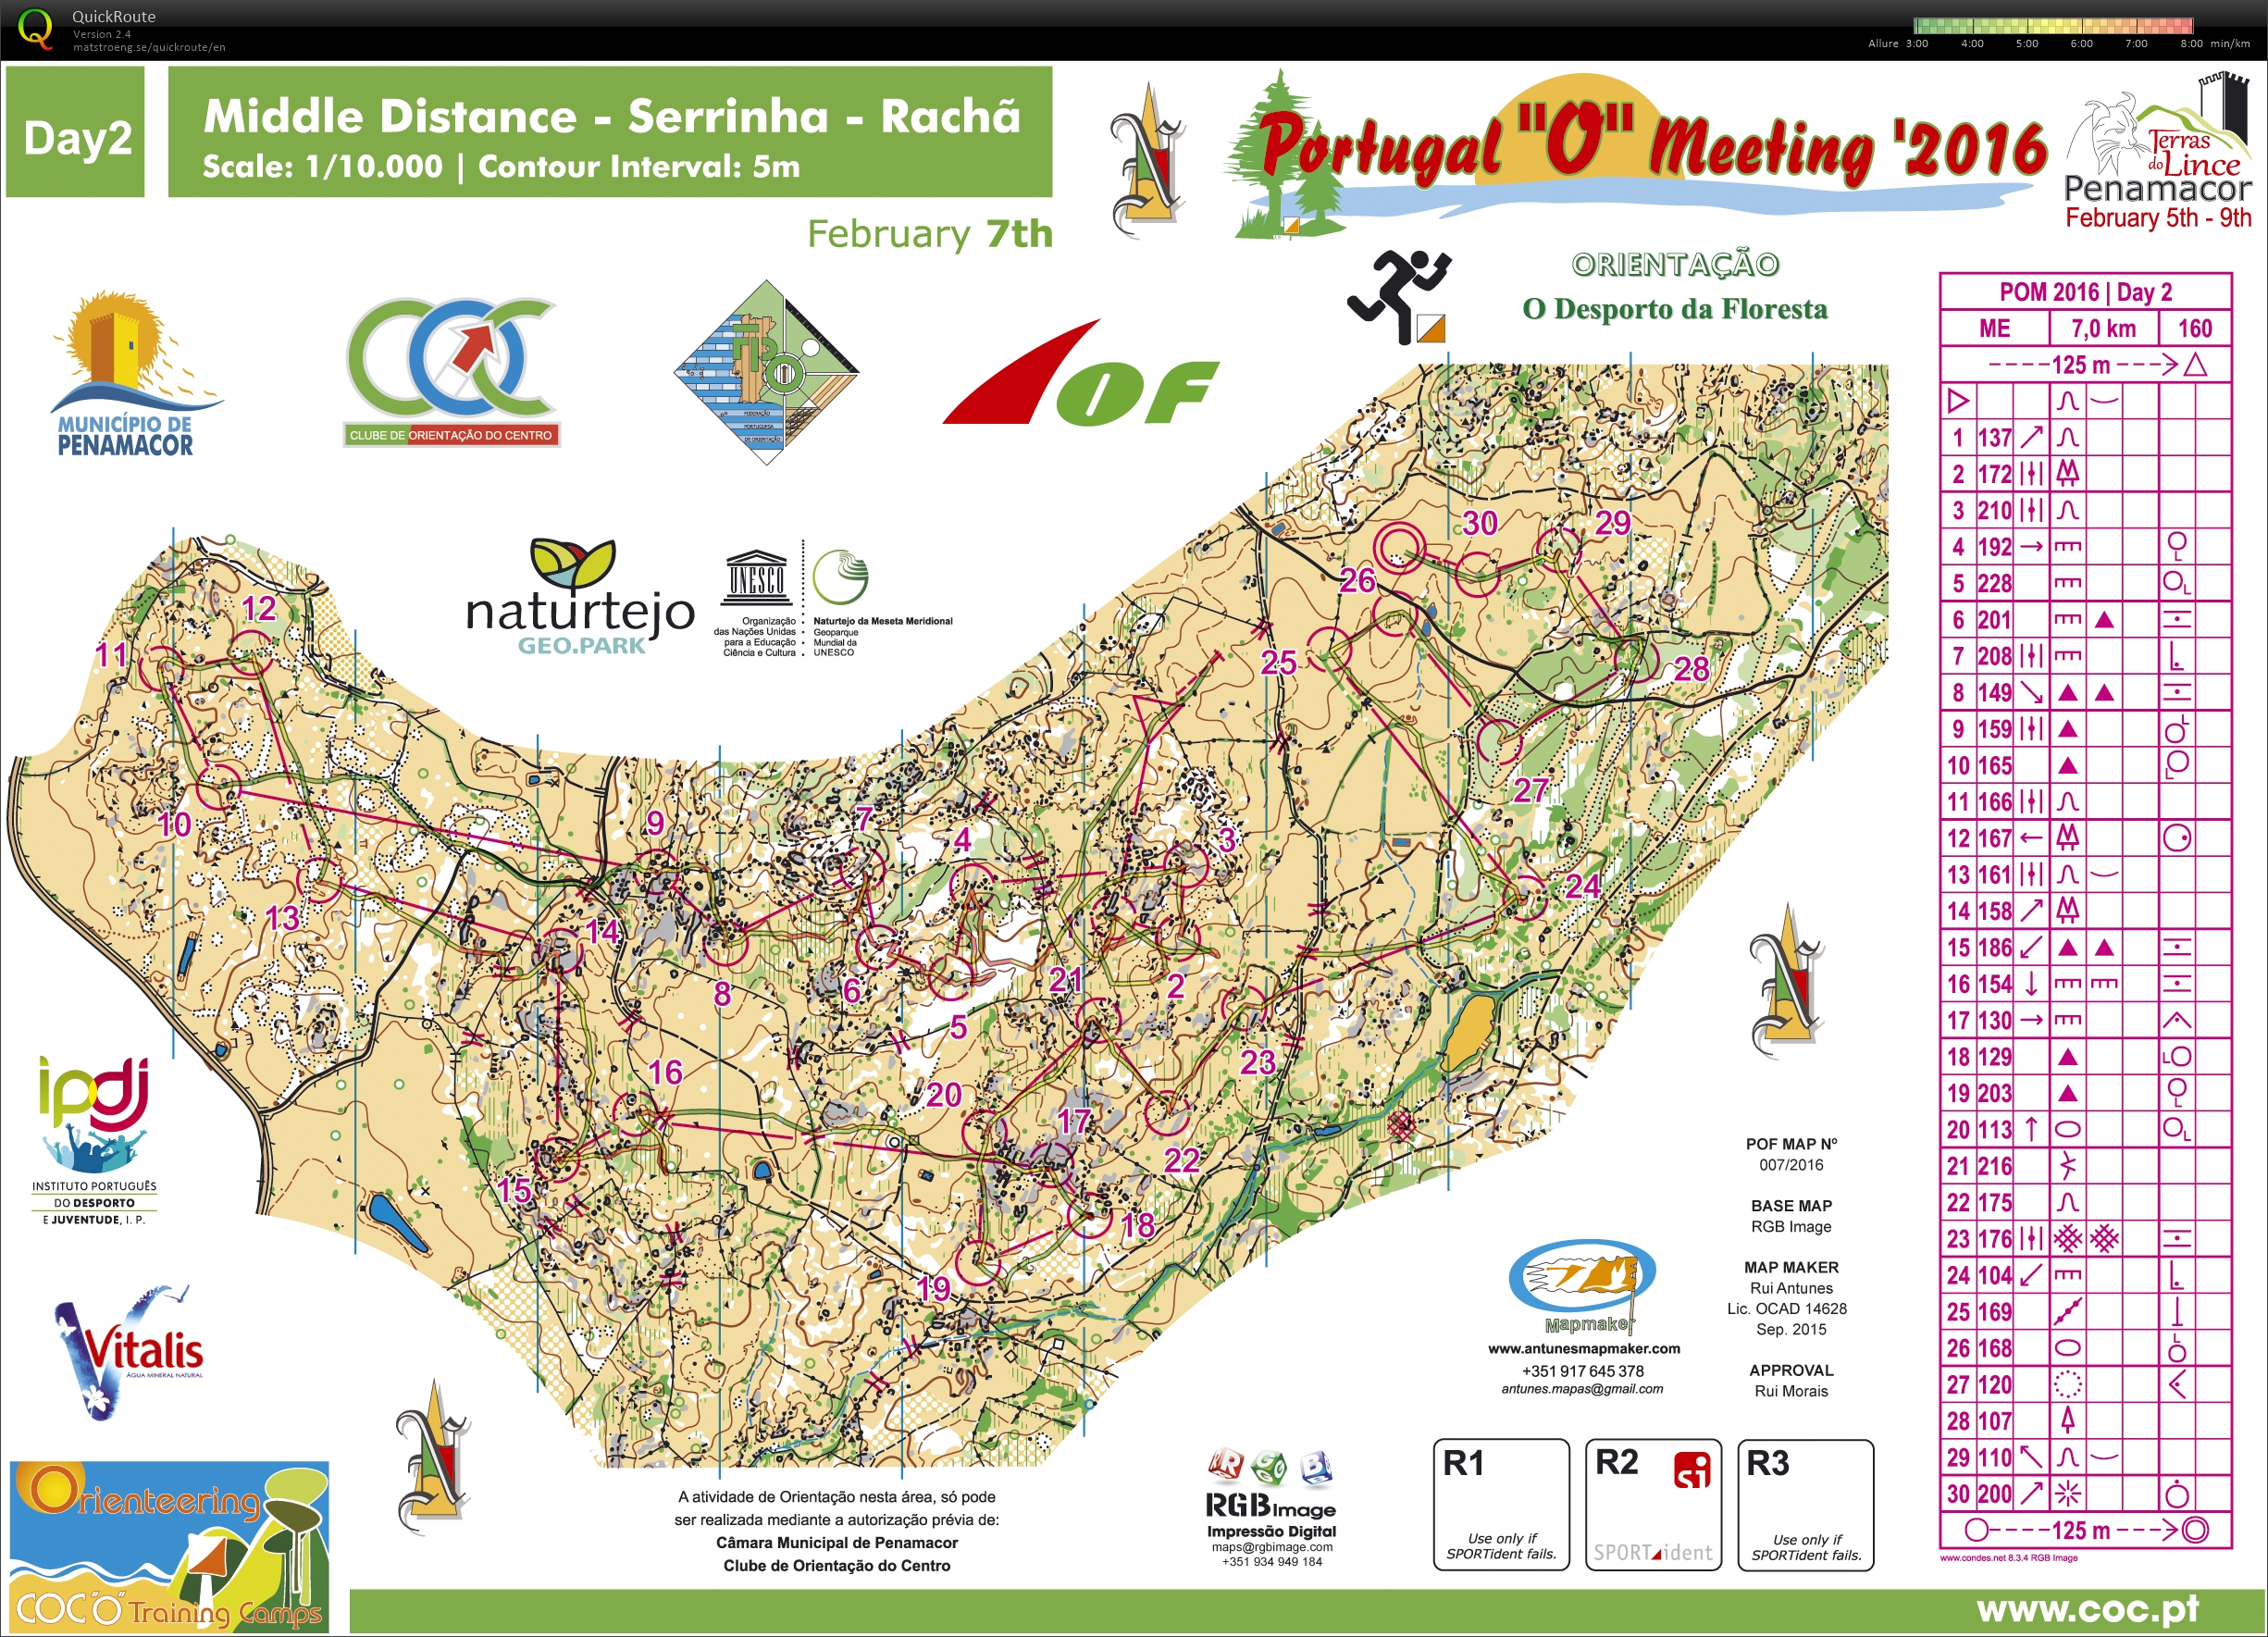 Portugal O Meeting Stage 2 (07.02.2016)